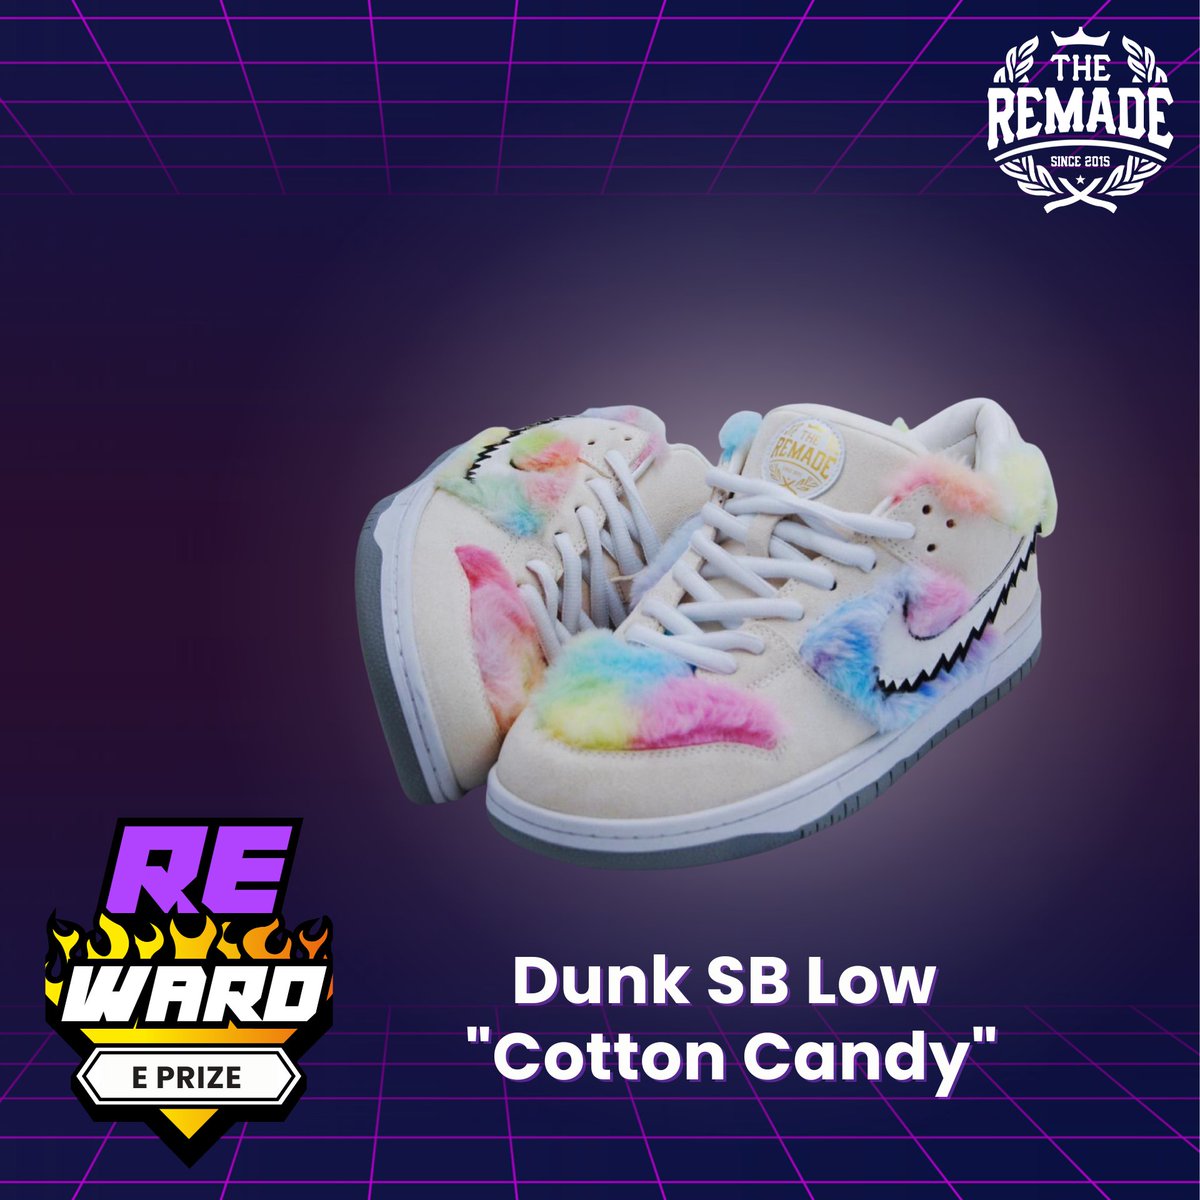 🍭E Prize: The Remade - #Nike Dunk SB Low #CottonCandy🍭 The E Prize is a 2021 reissue created by @TheRemade_ With its fluffy shoe body and an homage to Grateful Dead bears, this custom #Dunk SB is a must-have for fans of The Remade's limited edition kicks. #sneakers #RNFT